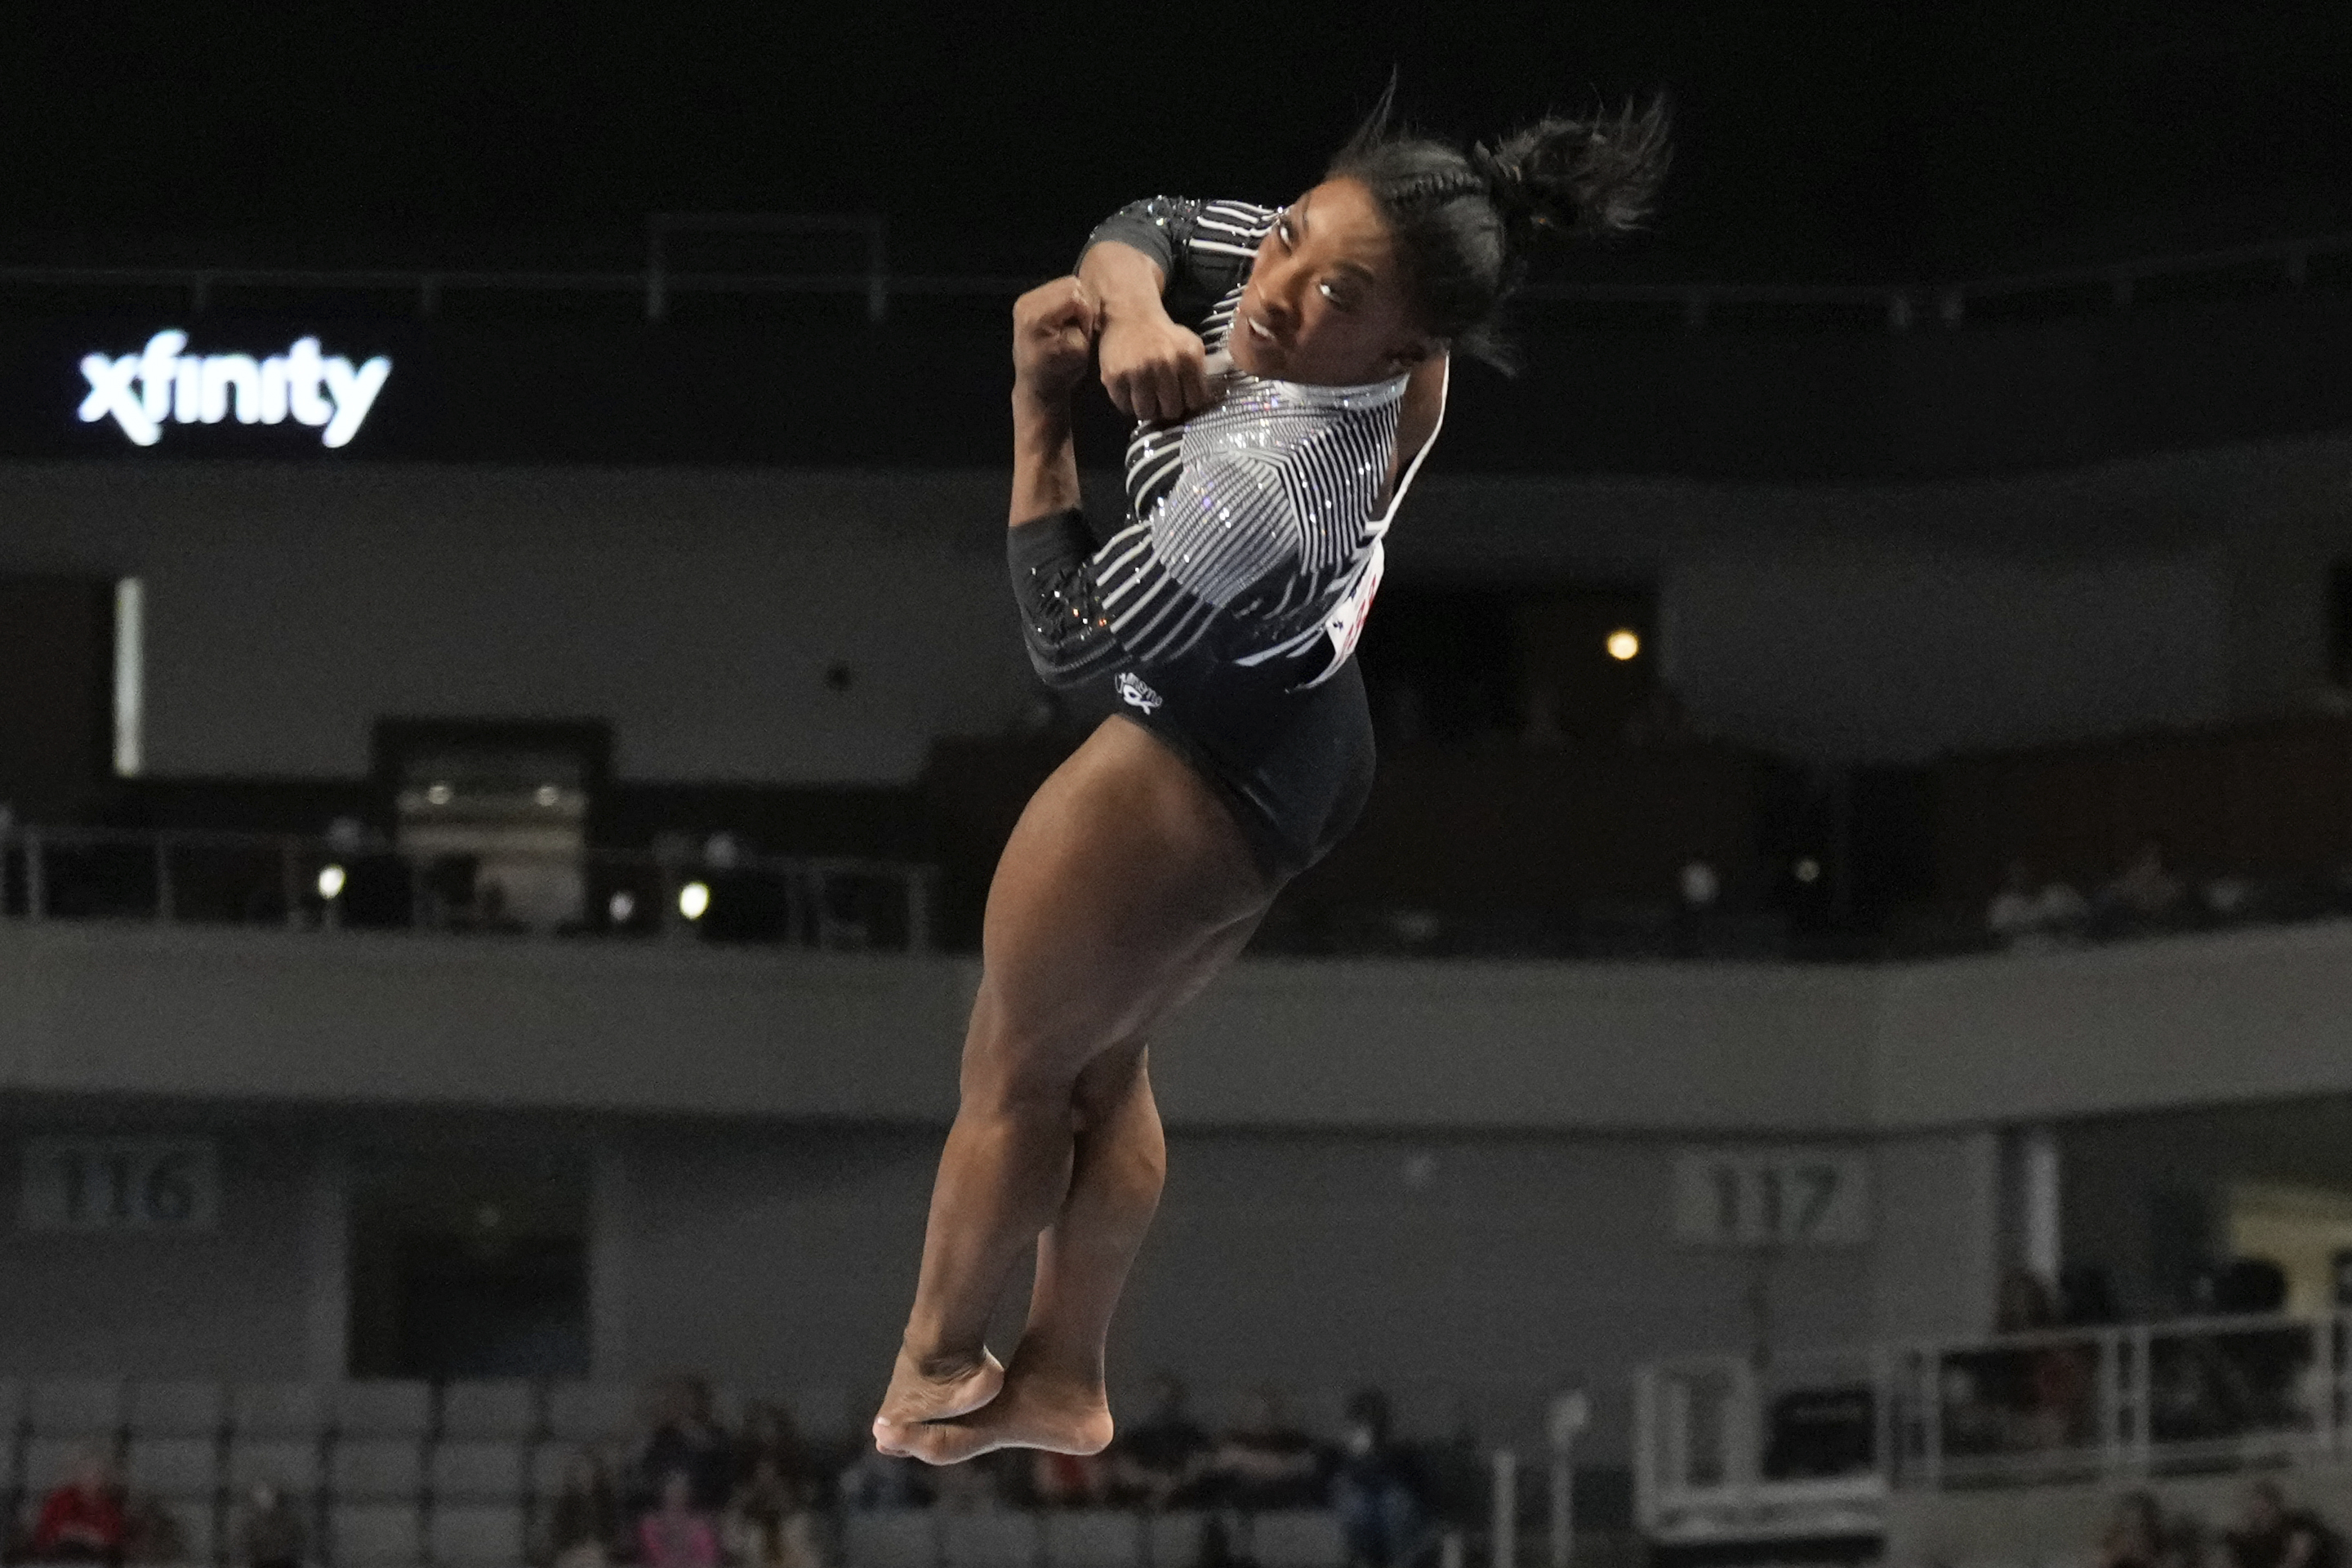 Simone Biles, looking perhaps better than ever, surges to early lead at